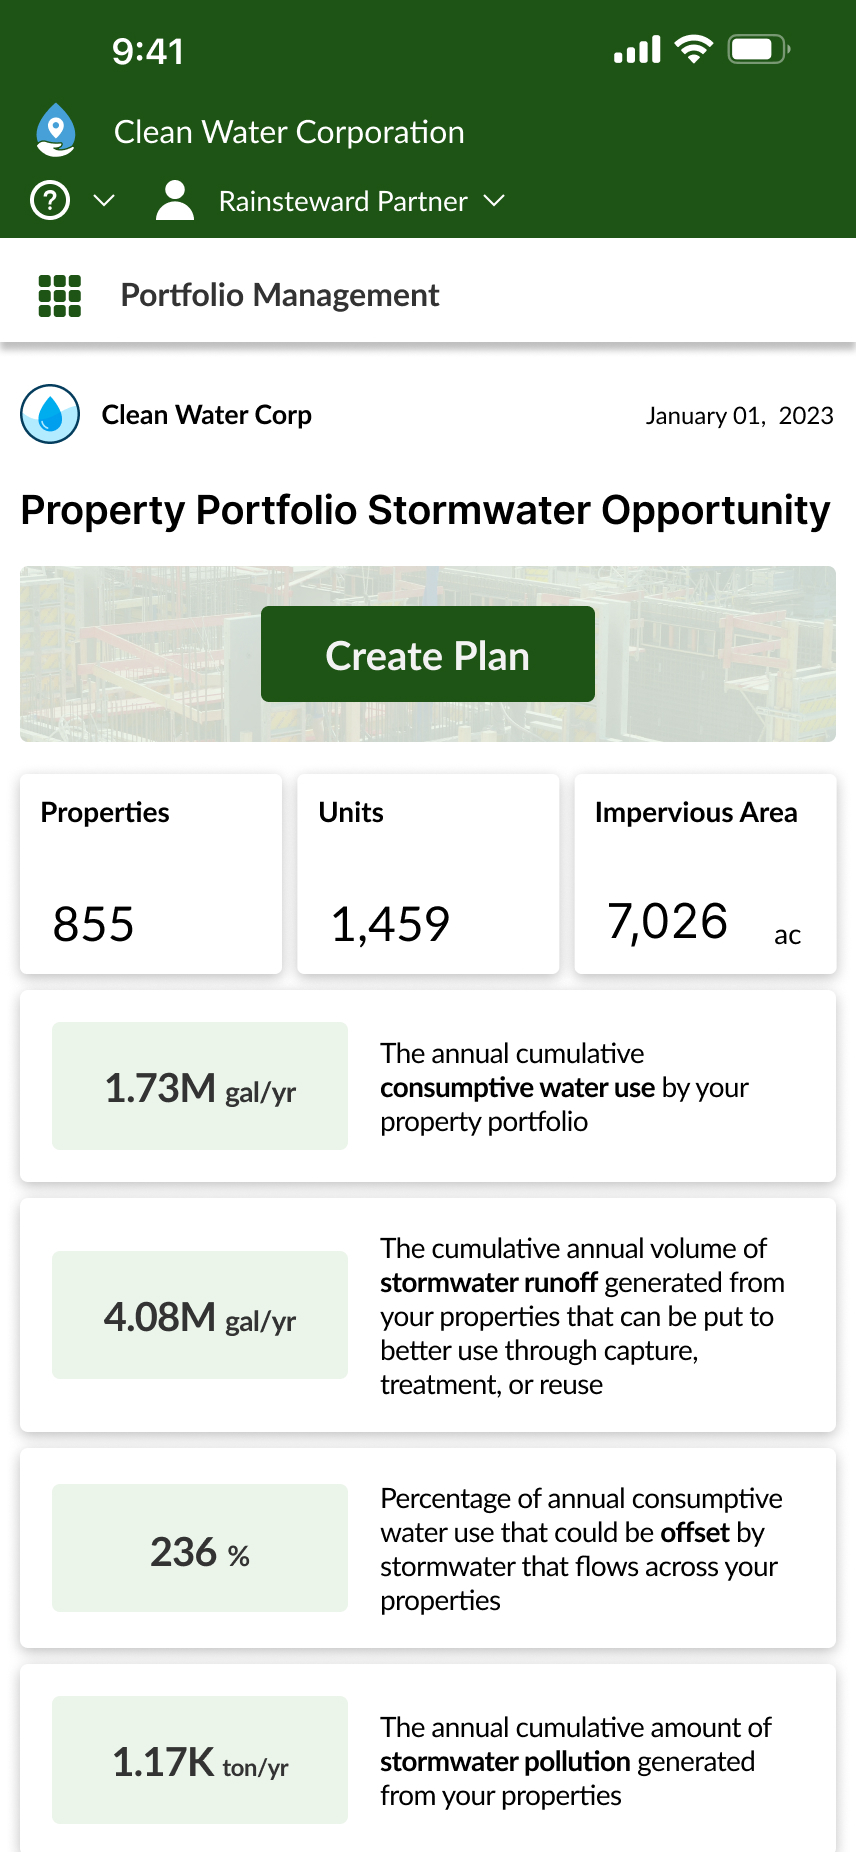 Unlock the potential value of stormwater stewardship regardless of the scale of your property portfolio with Rainsteward, a SaaS solution for organizations of all sizes.